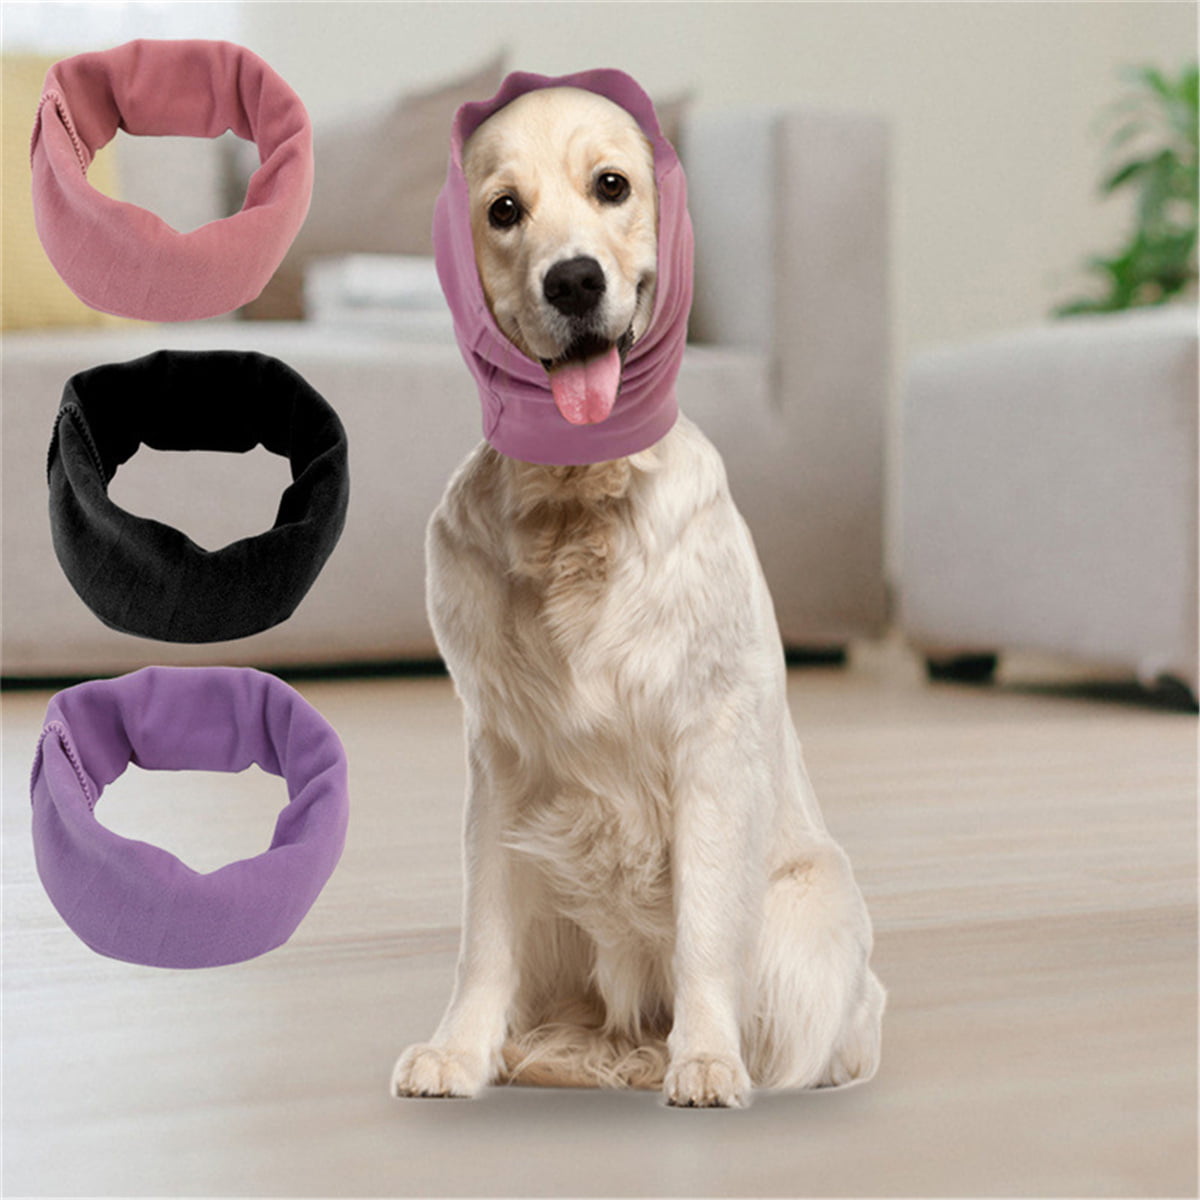 Dog Ear Muffs Stretchy Quiet Ears Head Wrap for Pet Dogs & Cats Adjustable Dog Ear Cover Snood for Noise Protection Anxiety Relief No Flap Ear Wraps for Dogs for Grooming and Neck and Ear Warmer 